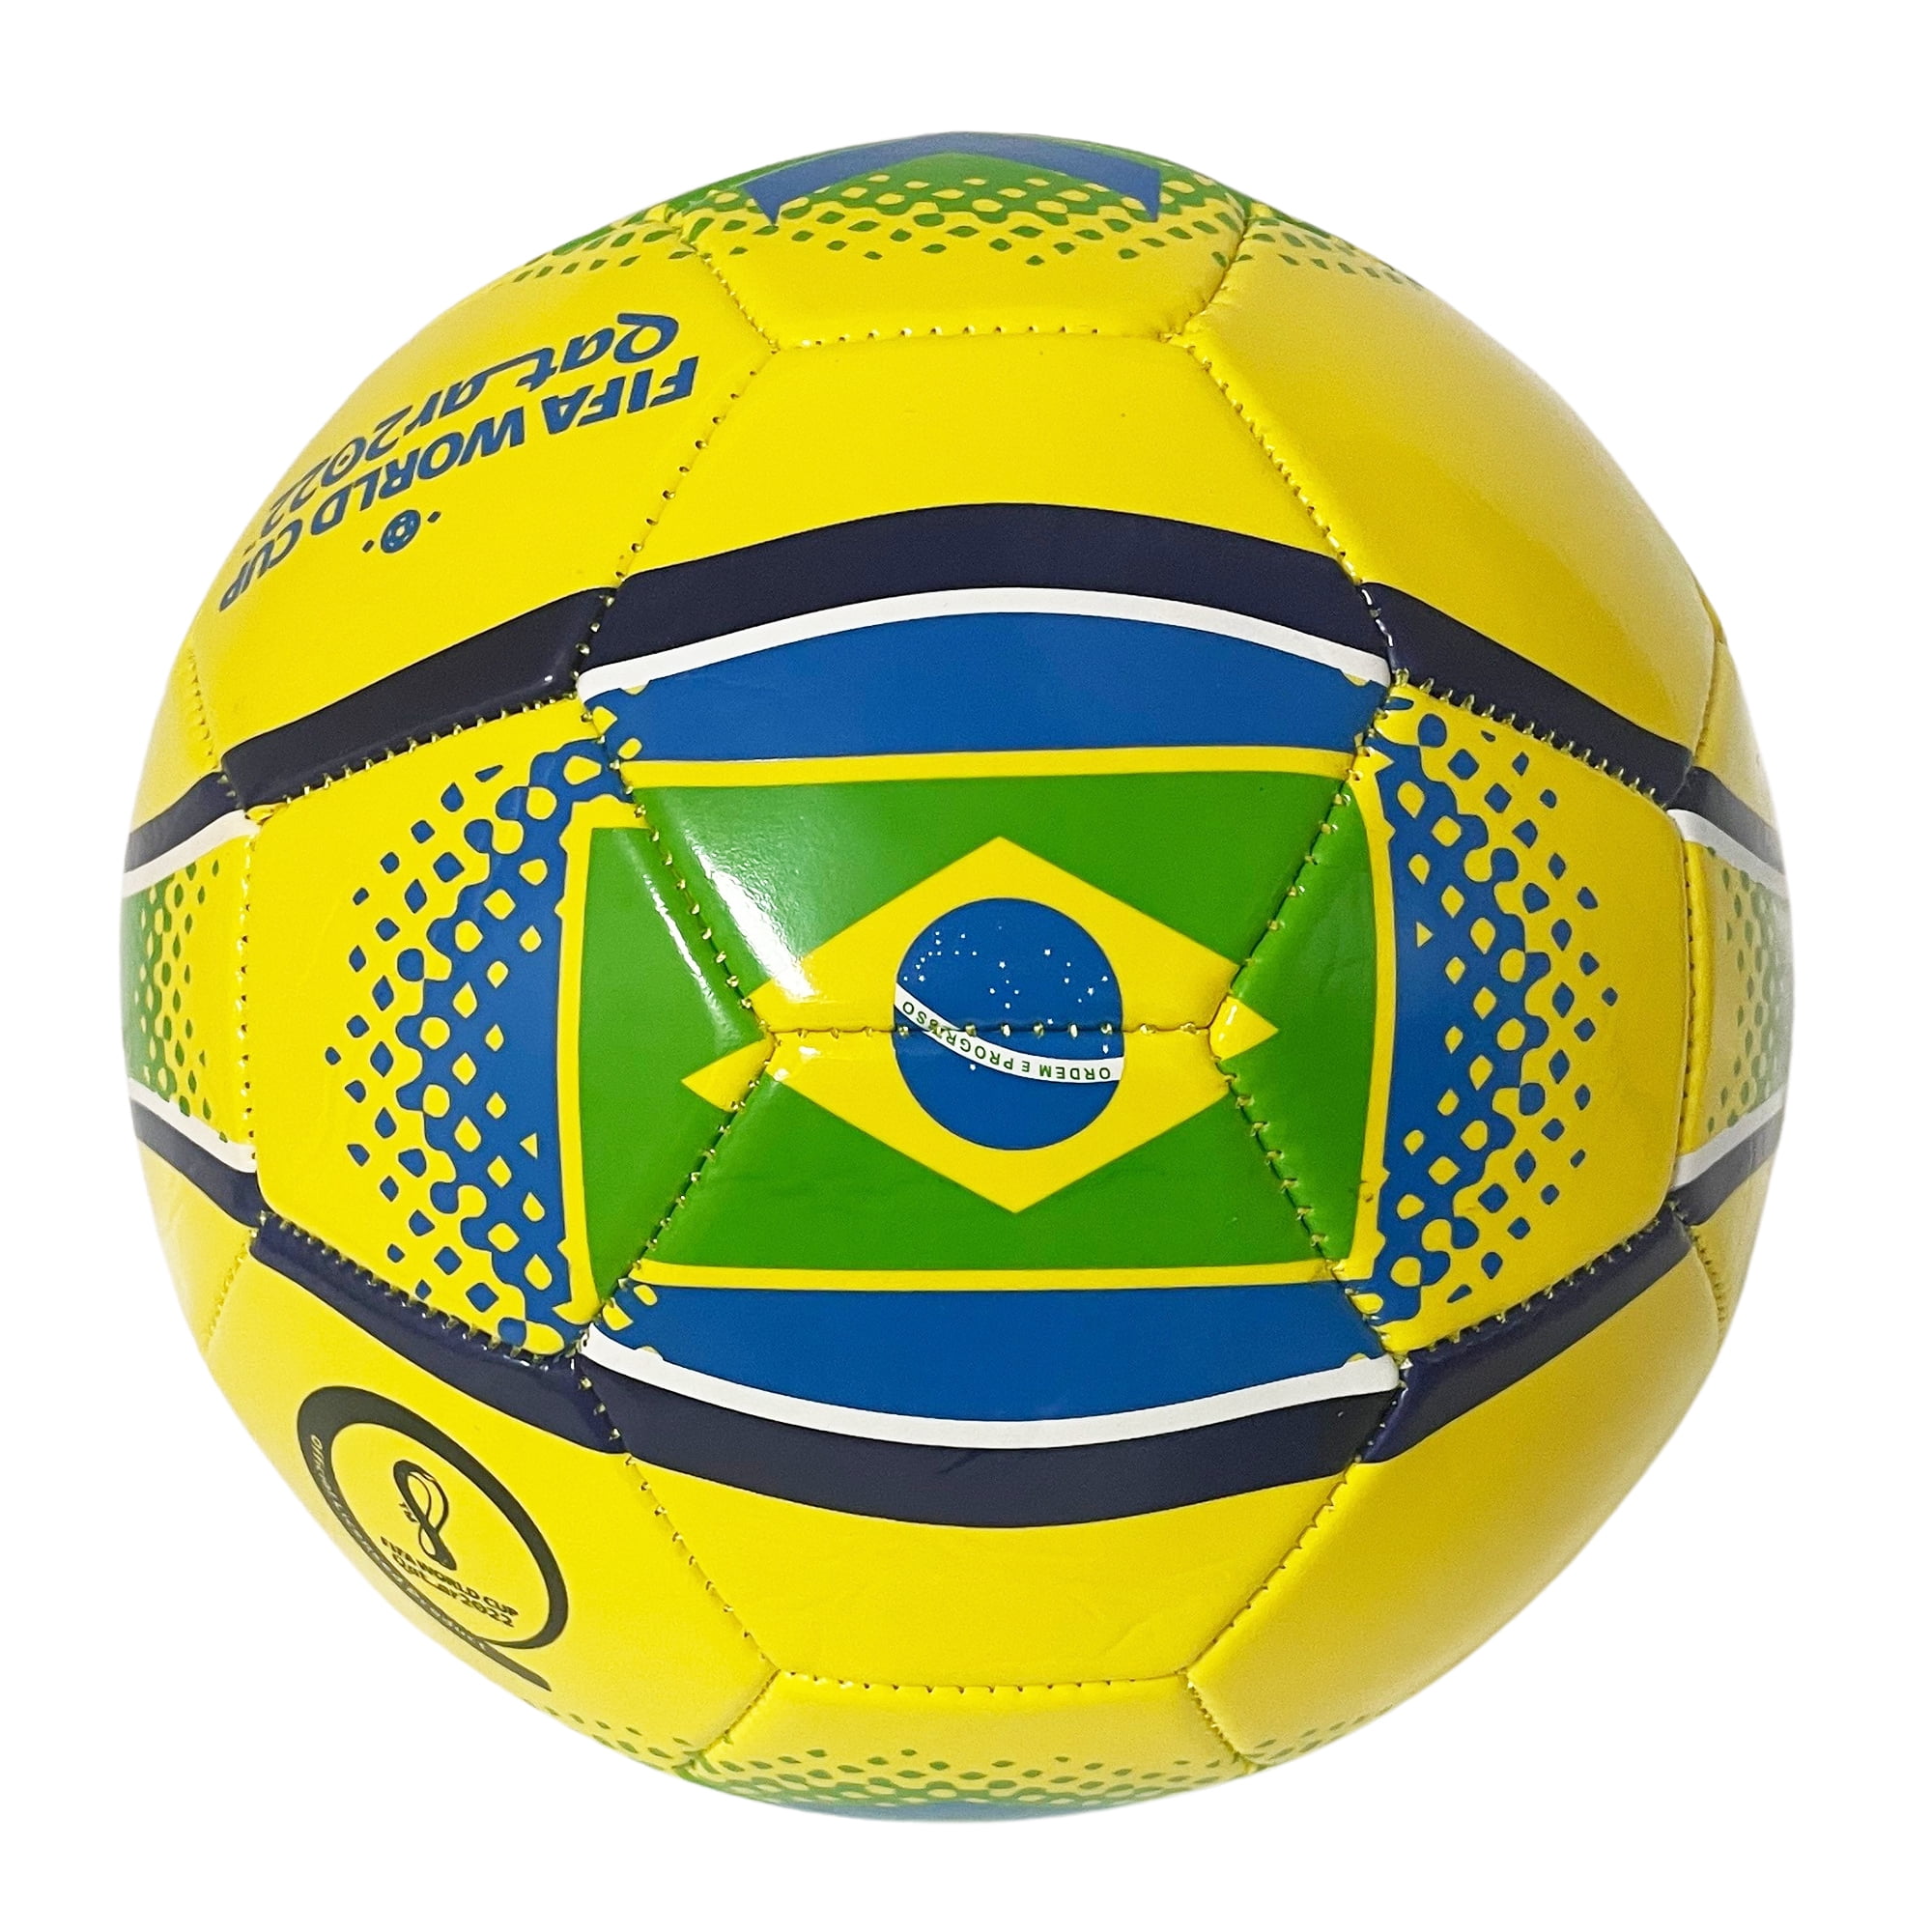 World Cup 2022 USA Licensed Ball Size 5 - Official FIFA Store